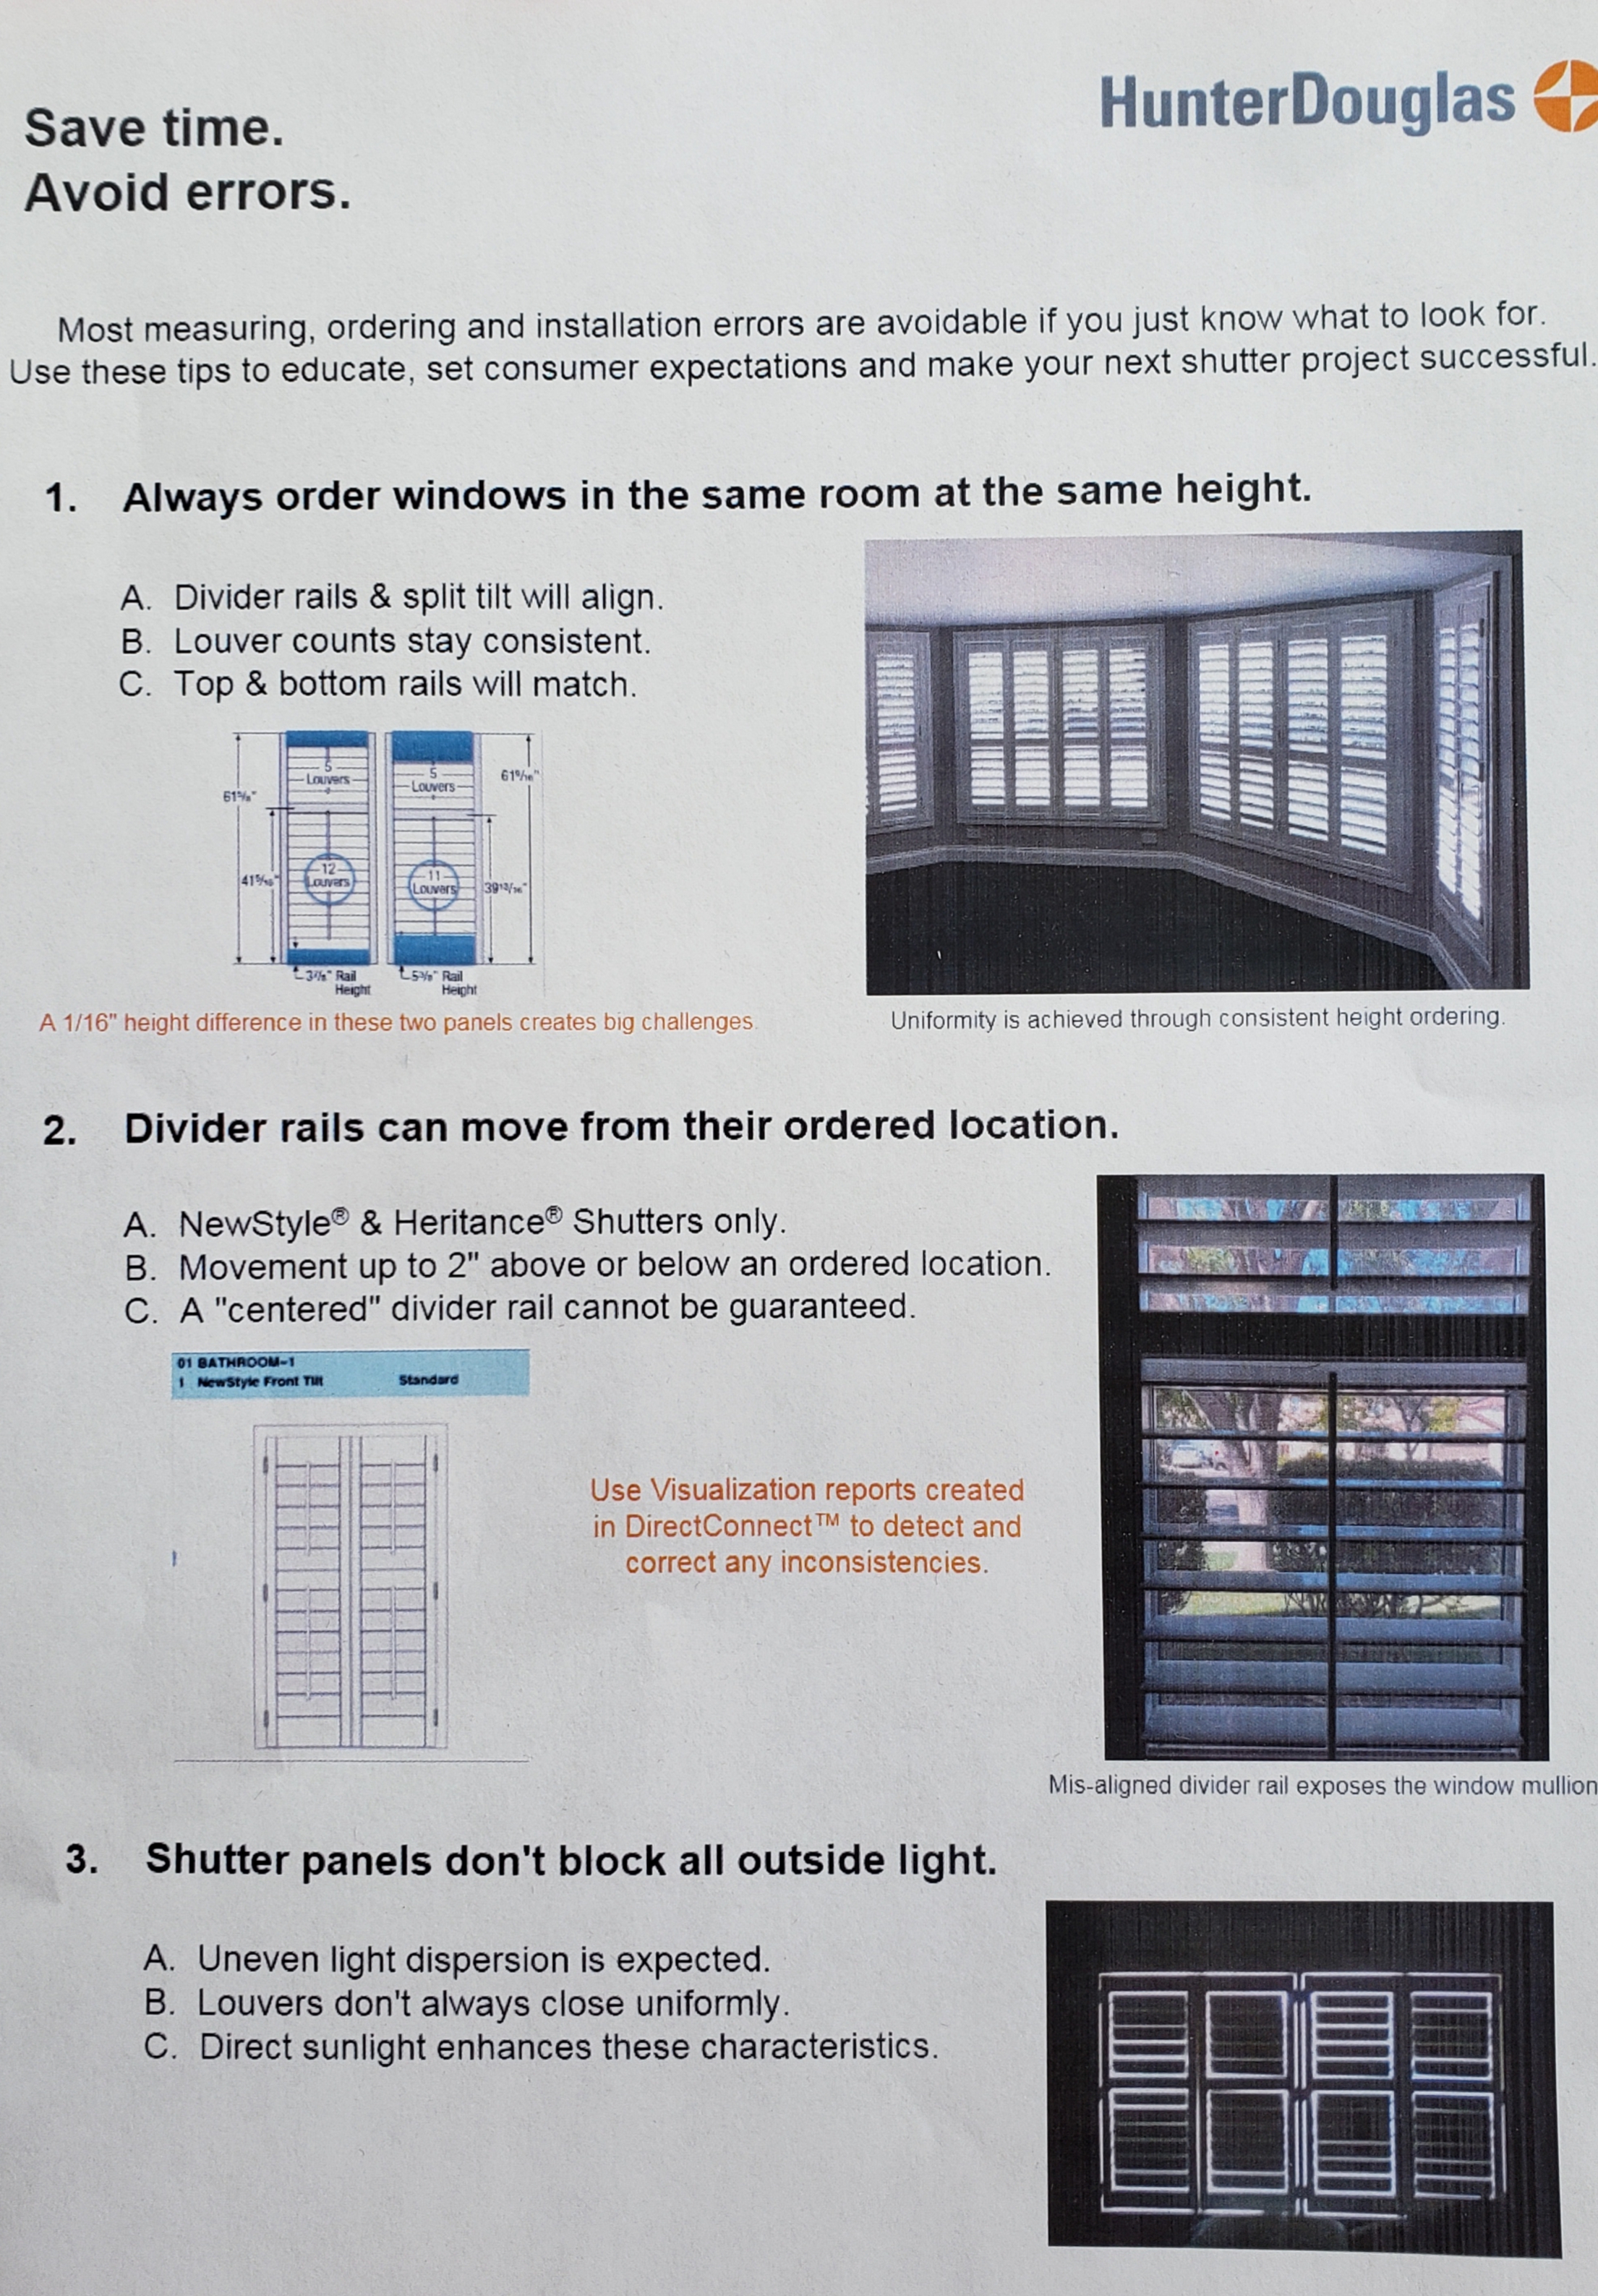 Guide to Aligning Vertical Louvers on Vertical Blinds